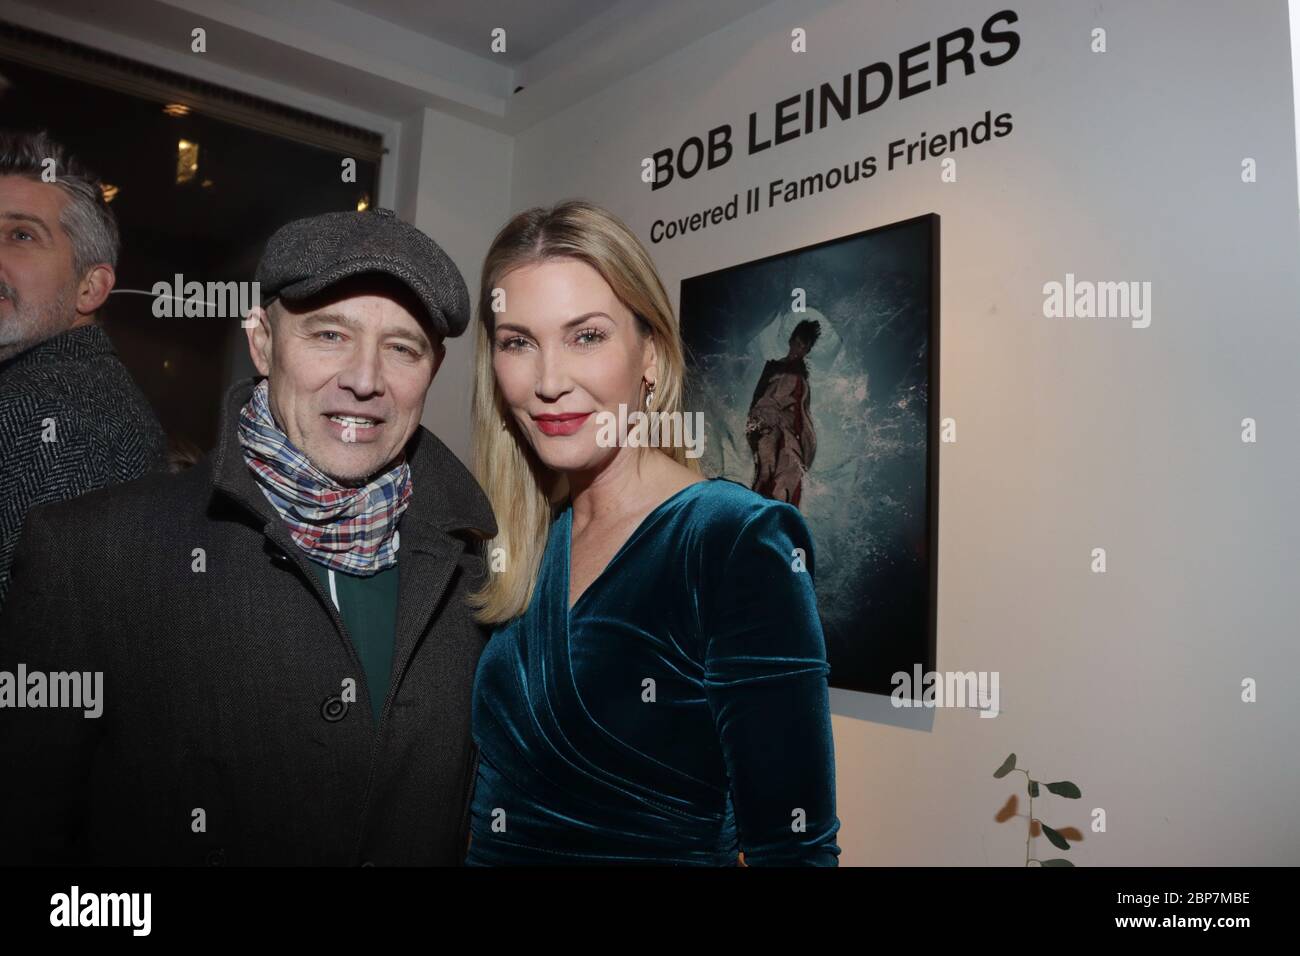 Andreas Brucker,Kirsten Roschlaub,Vernissage Bob Leinders 'COVERED II',Galerie Roschlaub,Hambourg,05.12.2019 Banque D'Images